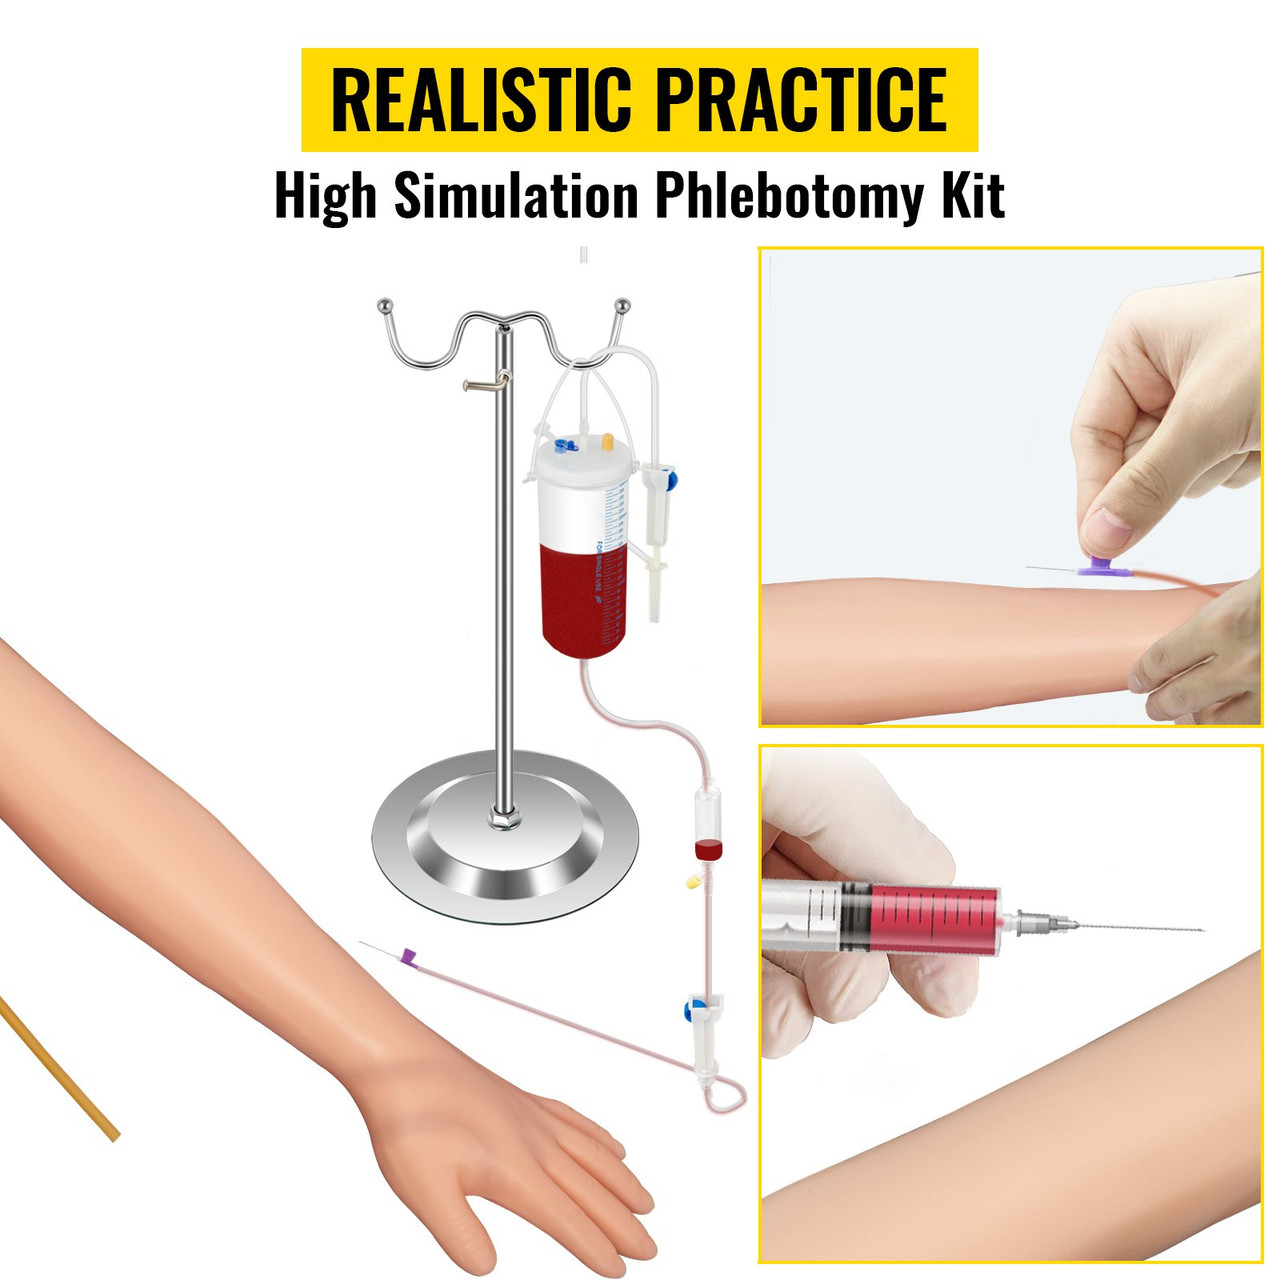 Phlebotomy Practice Kit 25 Pieces IV Practice Kit Phlebotomy Practice Arm Phlebotomy Skills IV Training Arm with Height Adjustable Infusion Stand for Nursing Medical Student